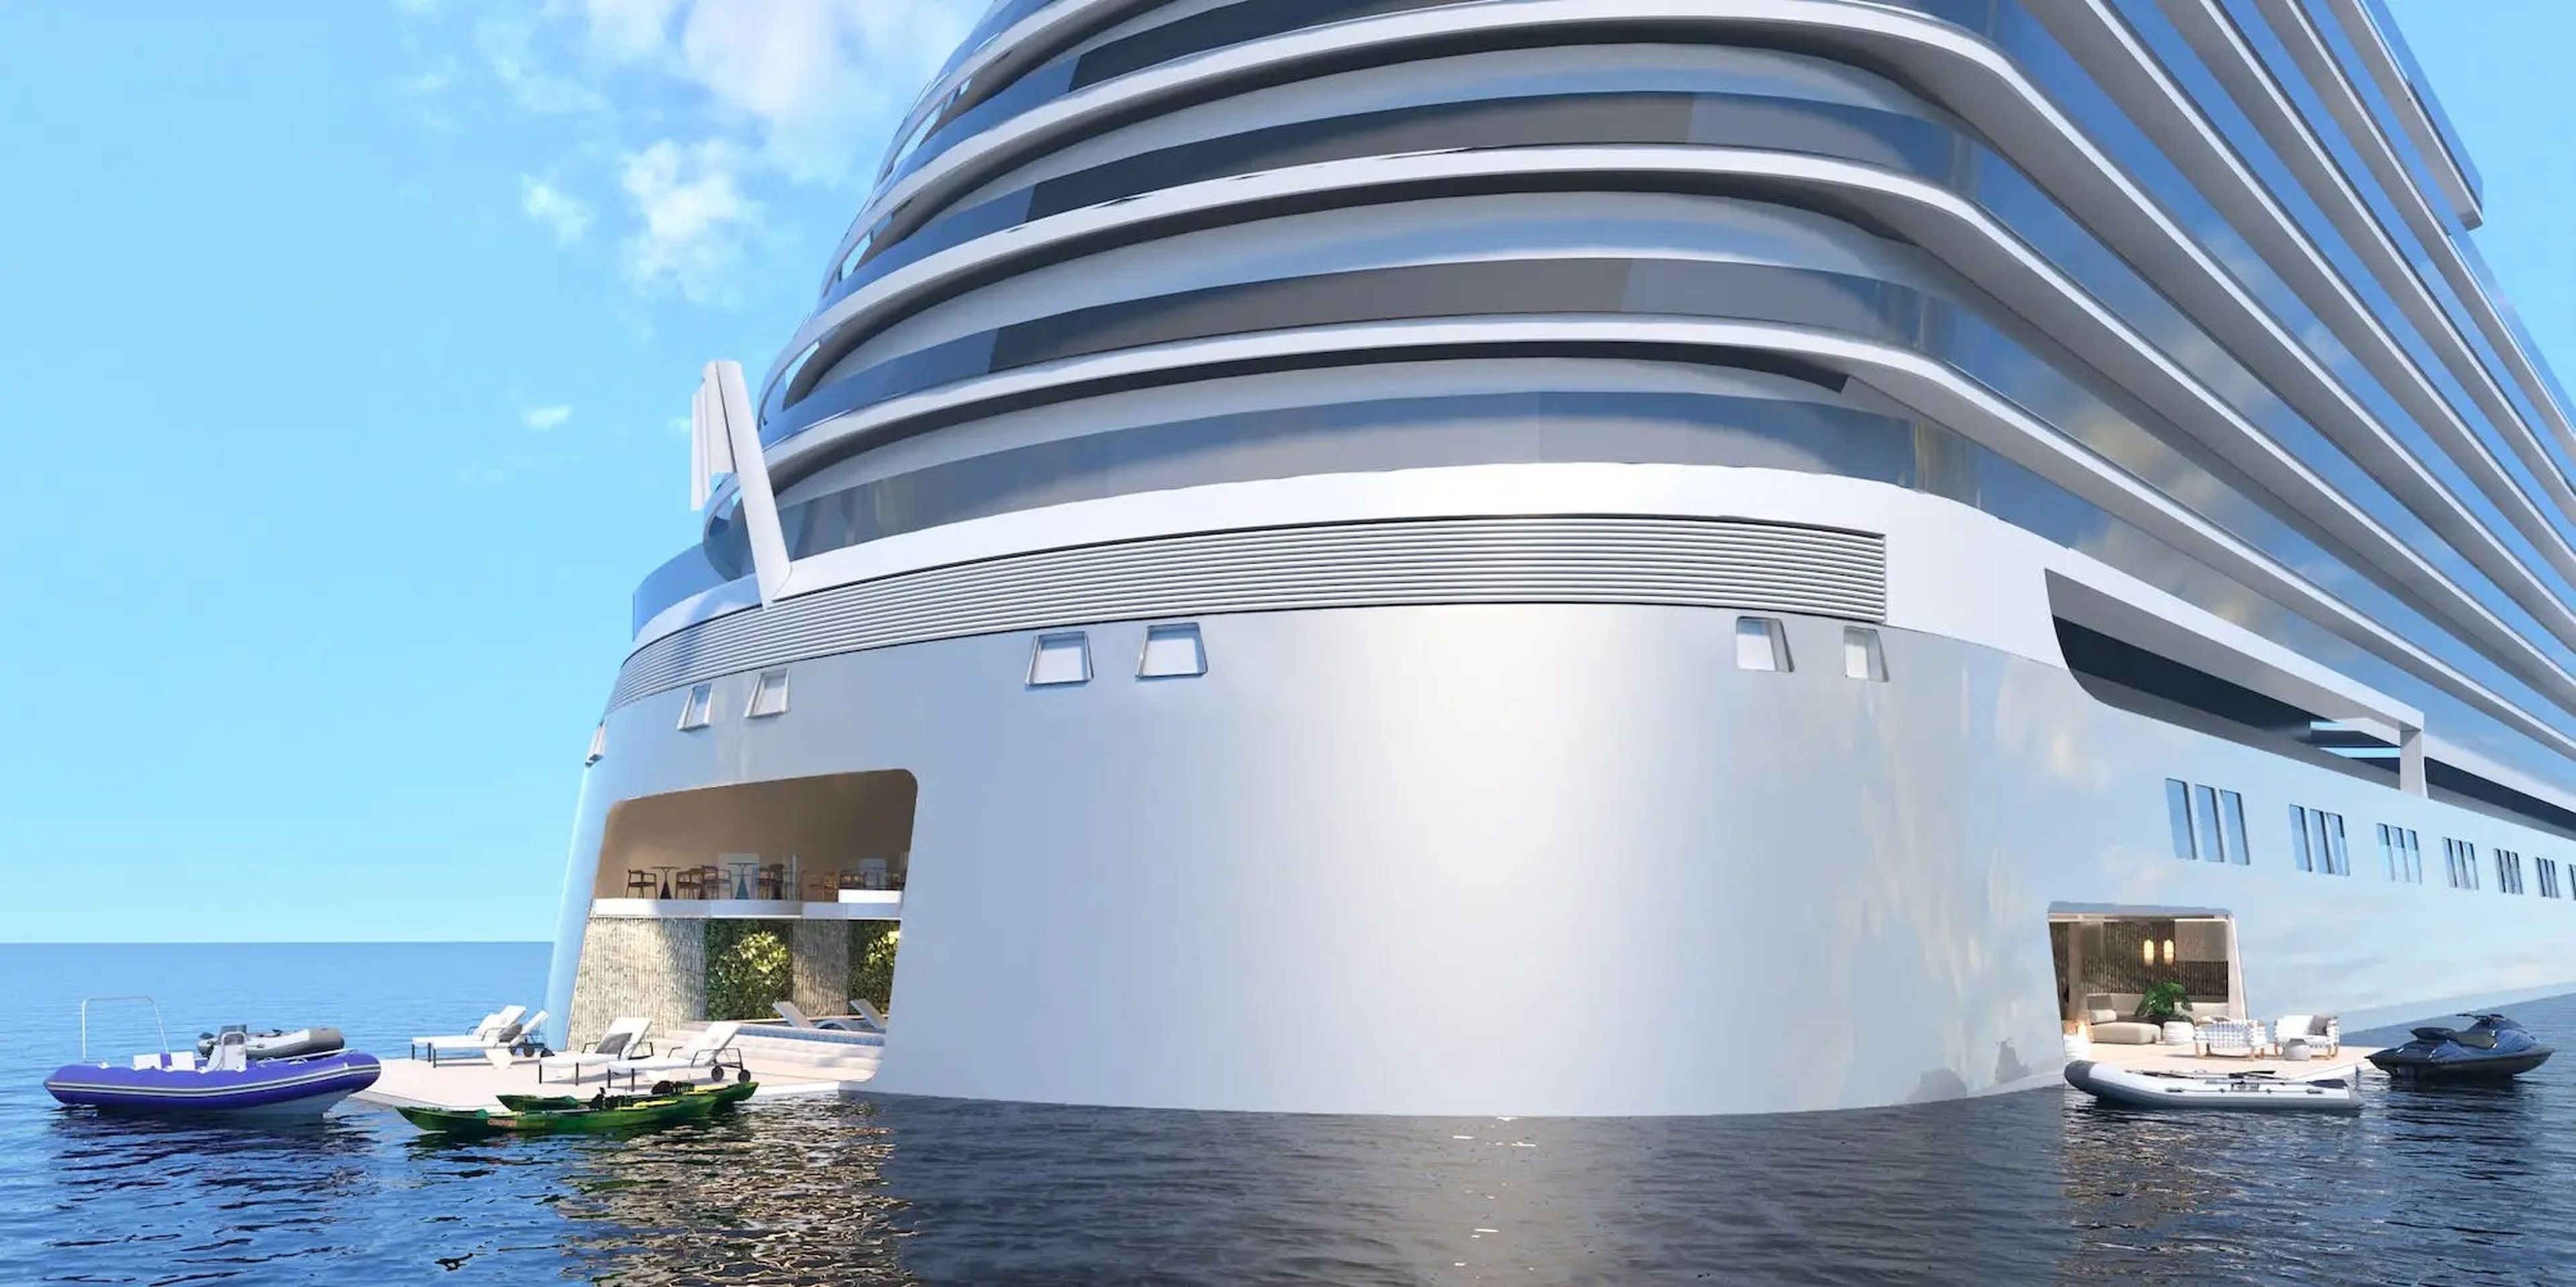 A rendering of the marina on Storylines' MV Narrative cruise ship.